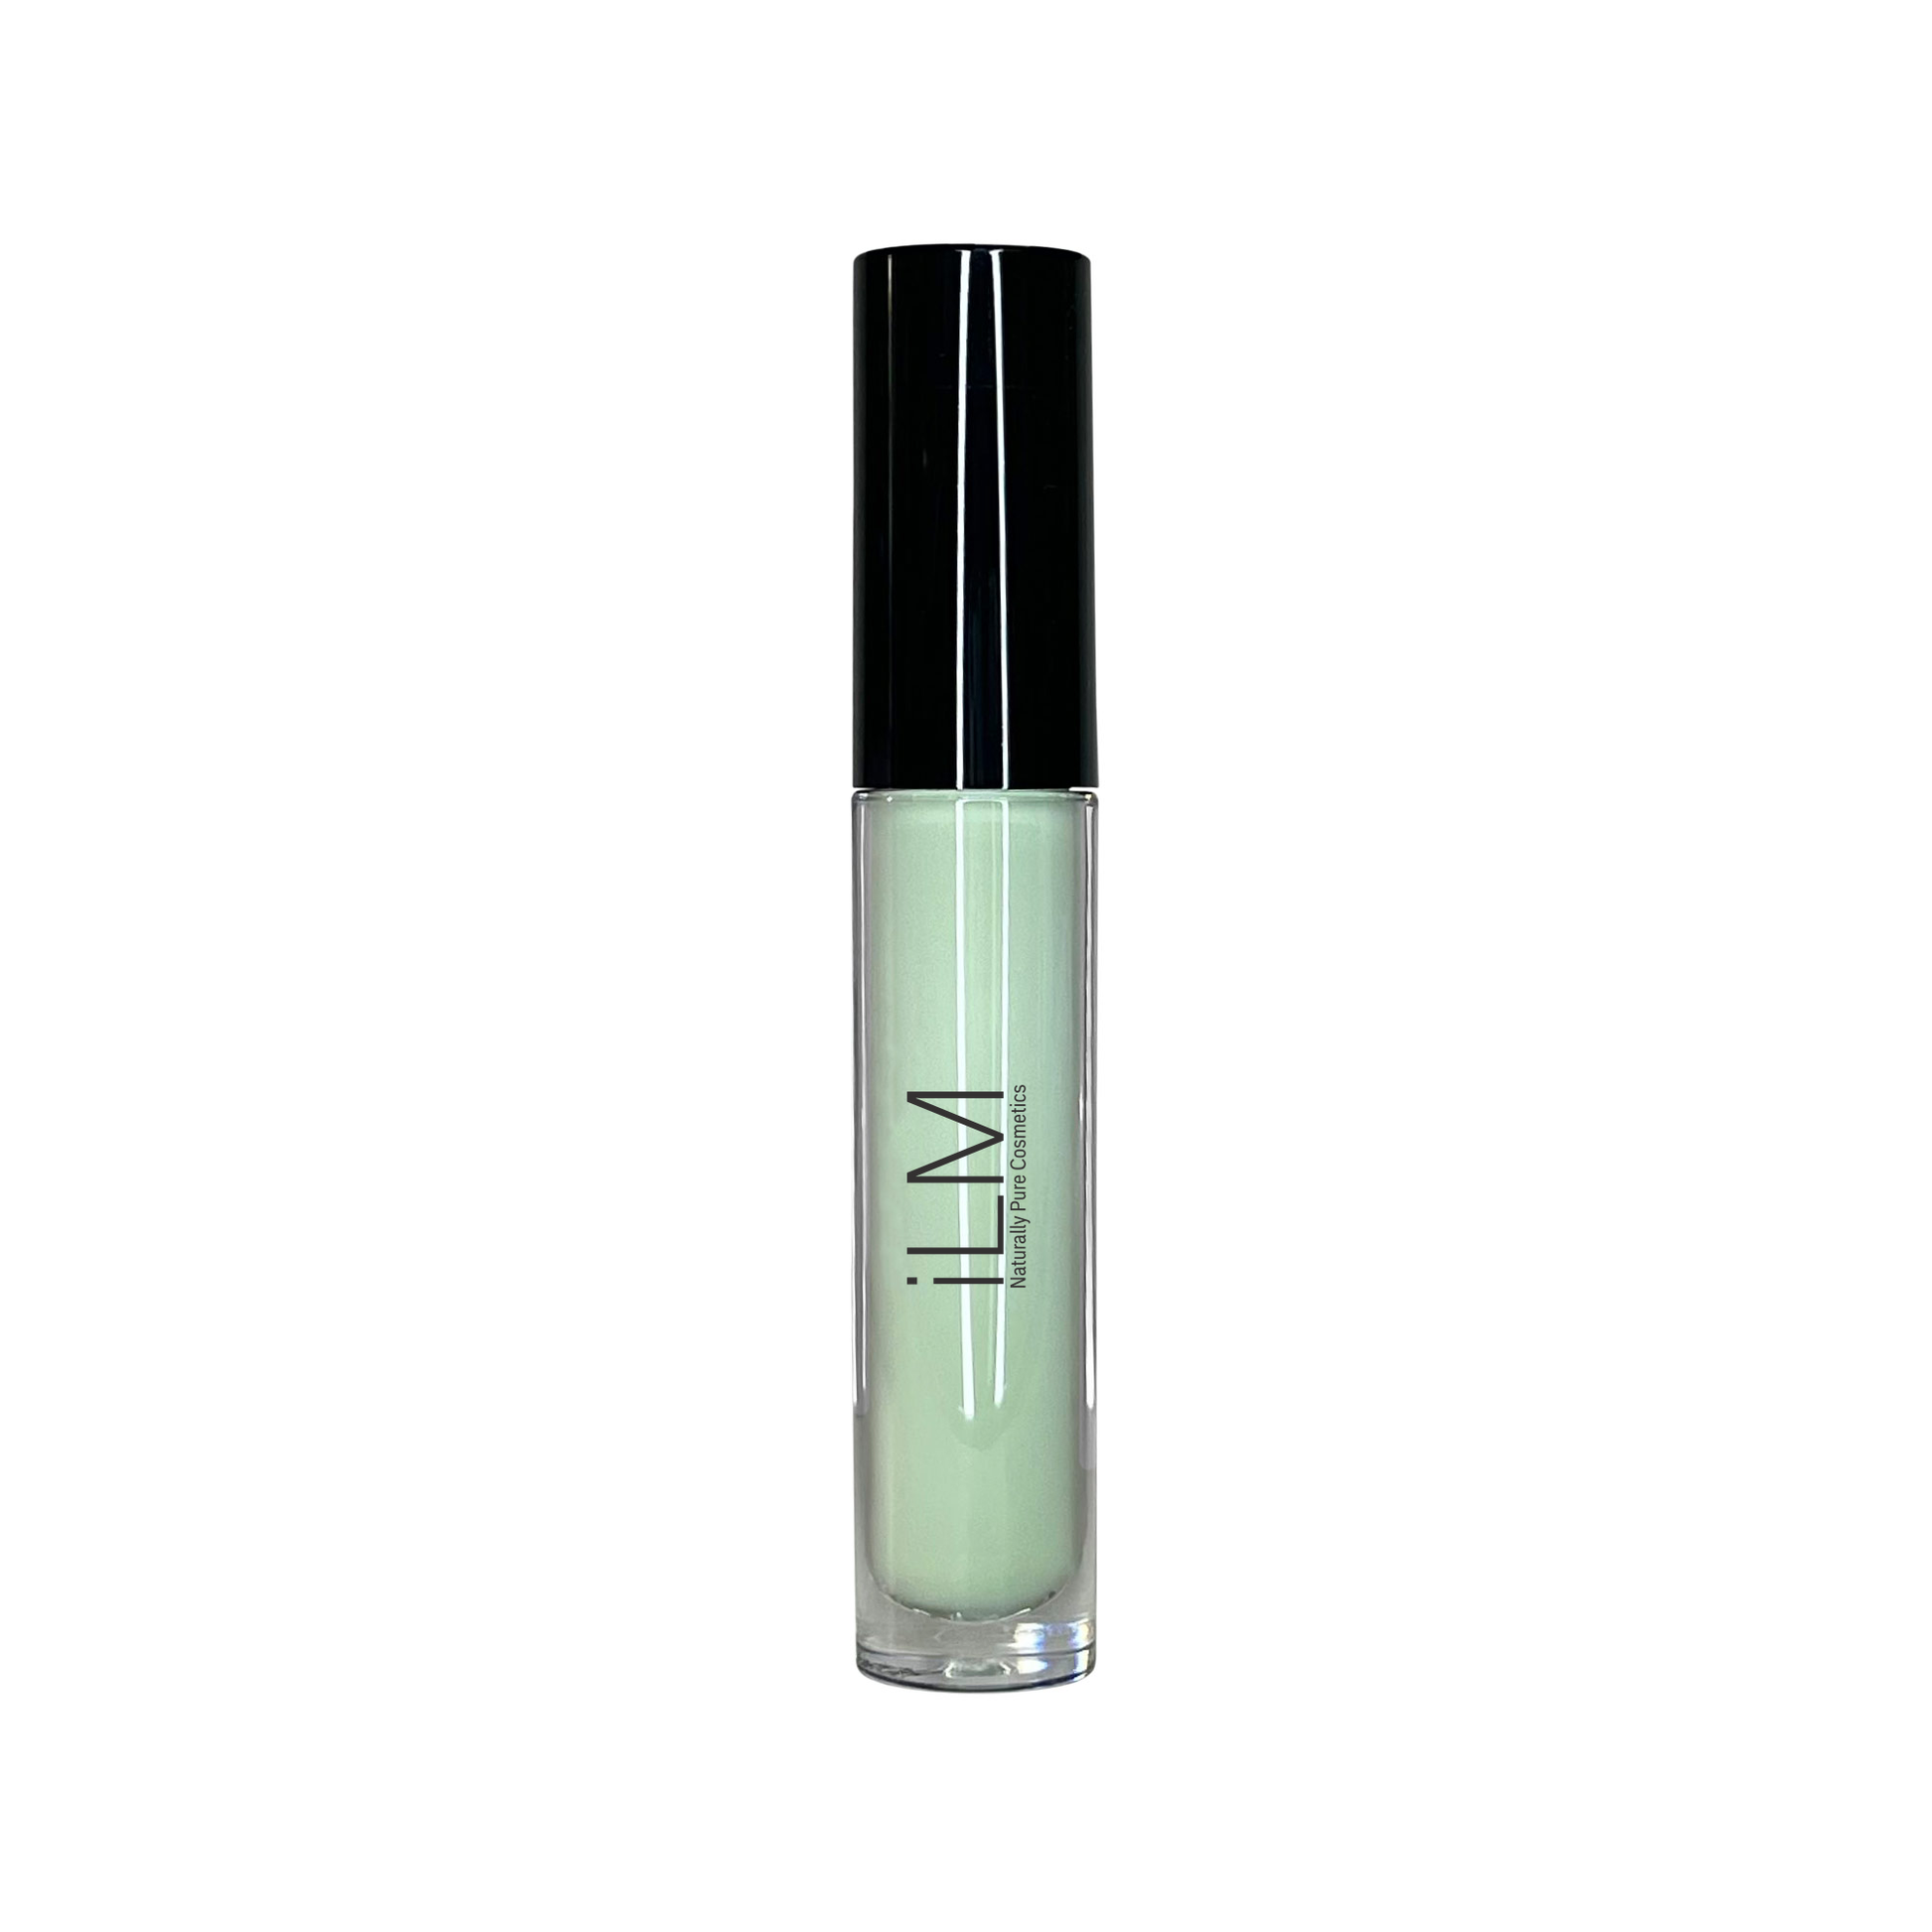 This incredible iLM Cosmetic Concealing Cream provides full coverage and brightens your skin! It's the ultimate spot treatment and color corrector that you'll love. And, it can even be layered over foundation. The super creamy formula is super blendable, illuminating your skin and concealing any uneven tones.